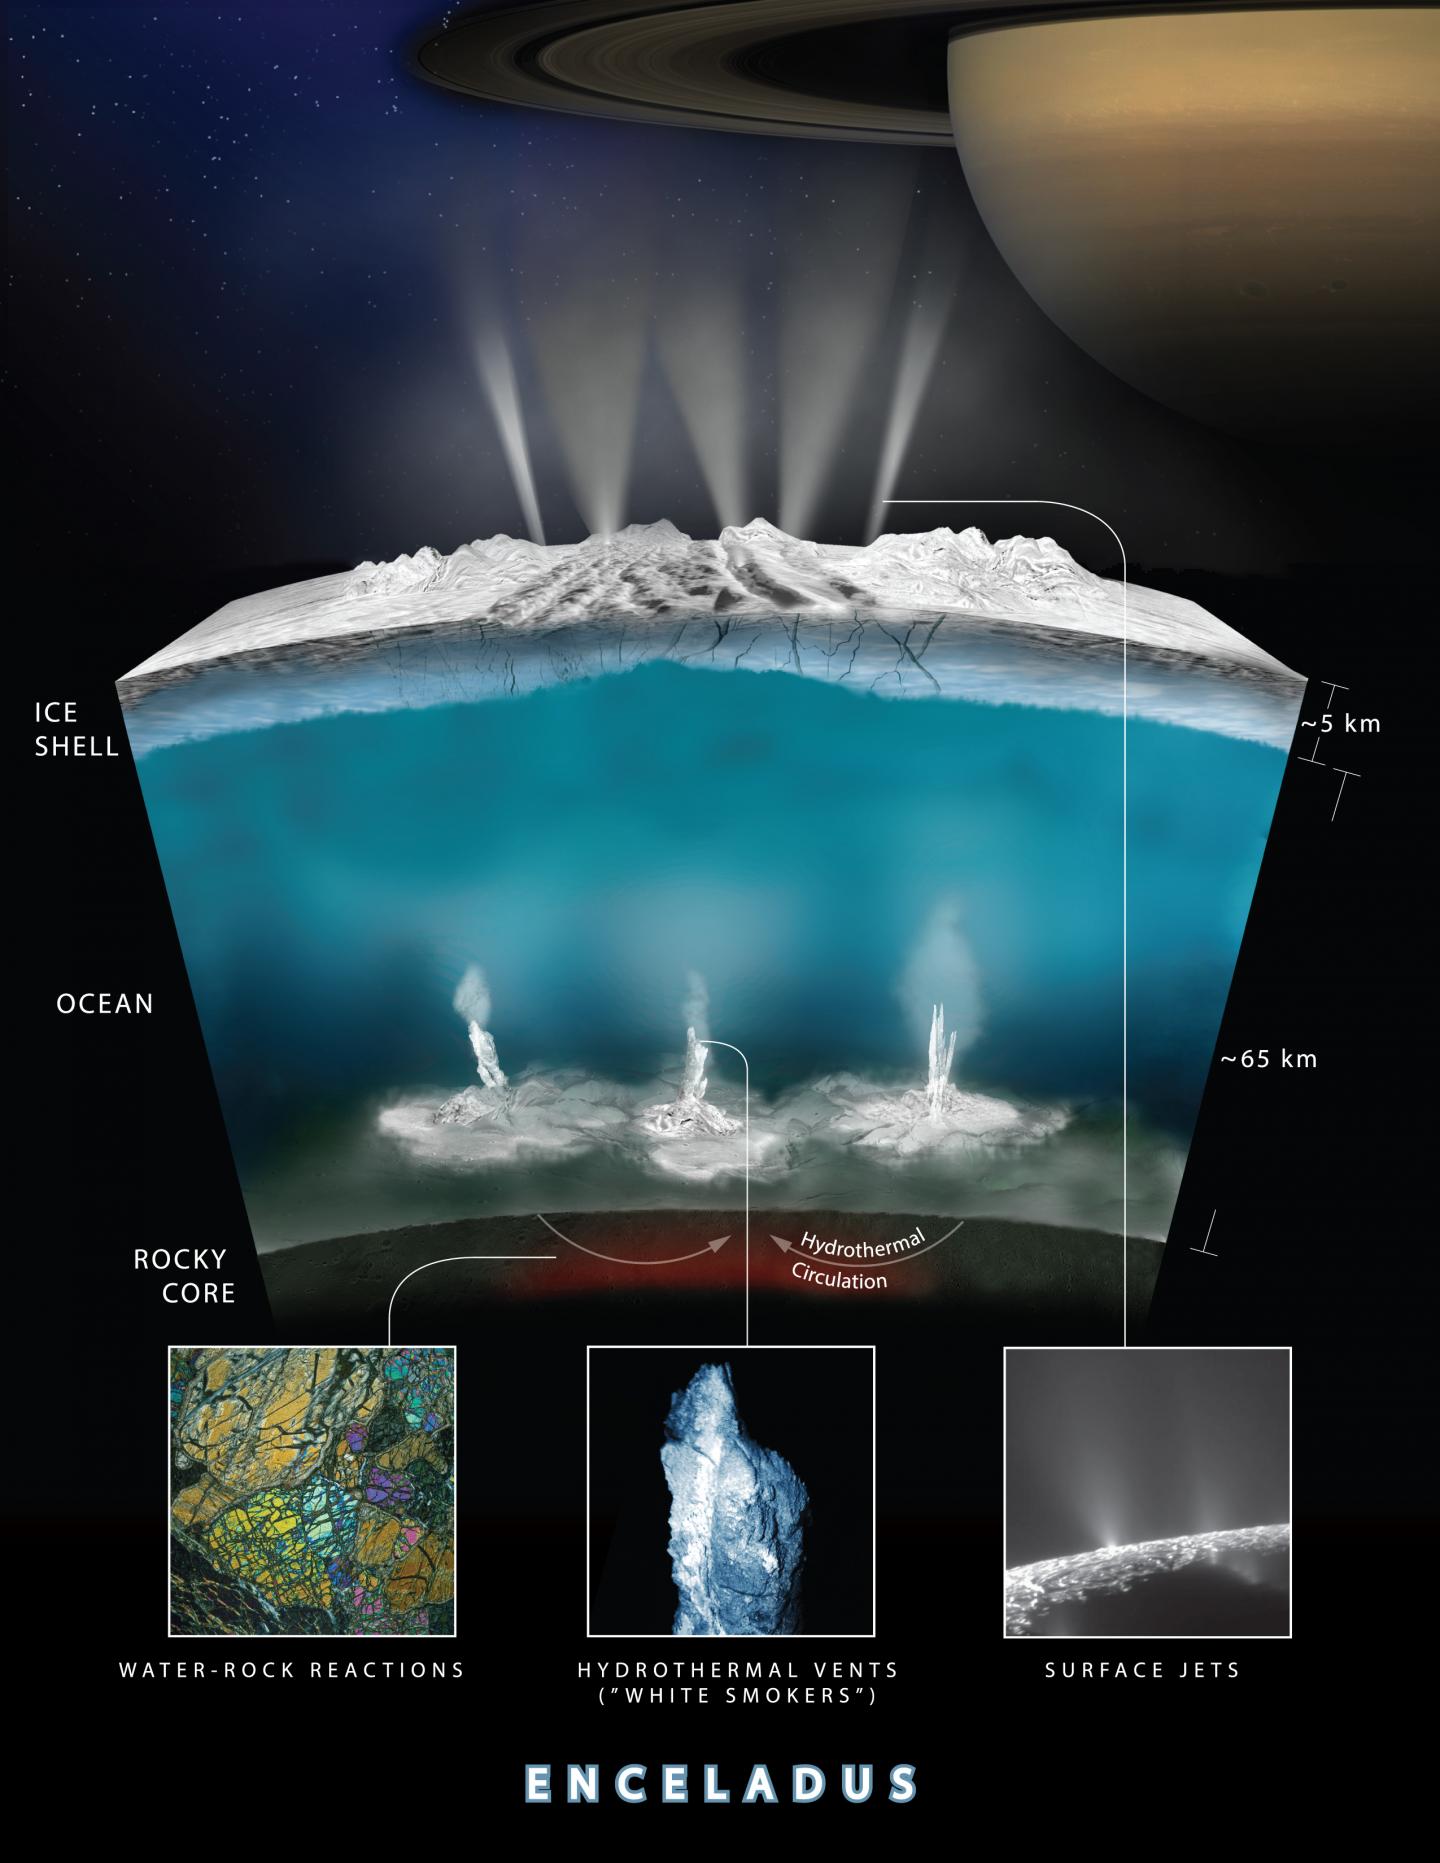 Graphic of Enceladus' Thermal Vents